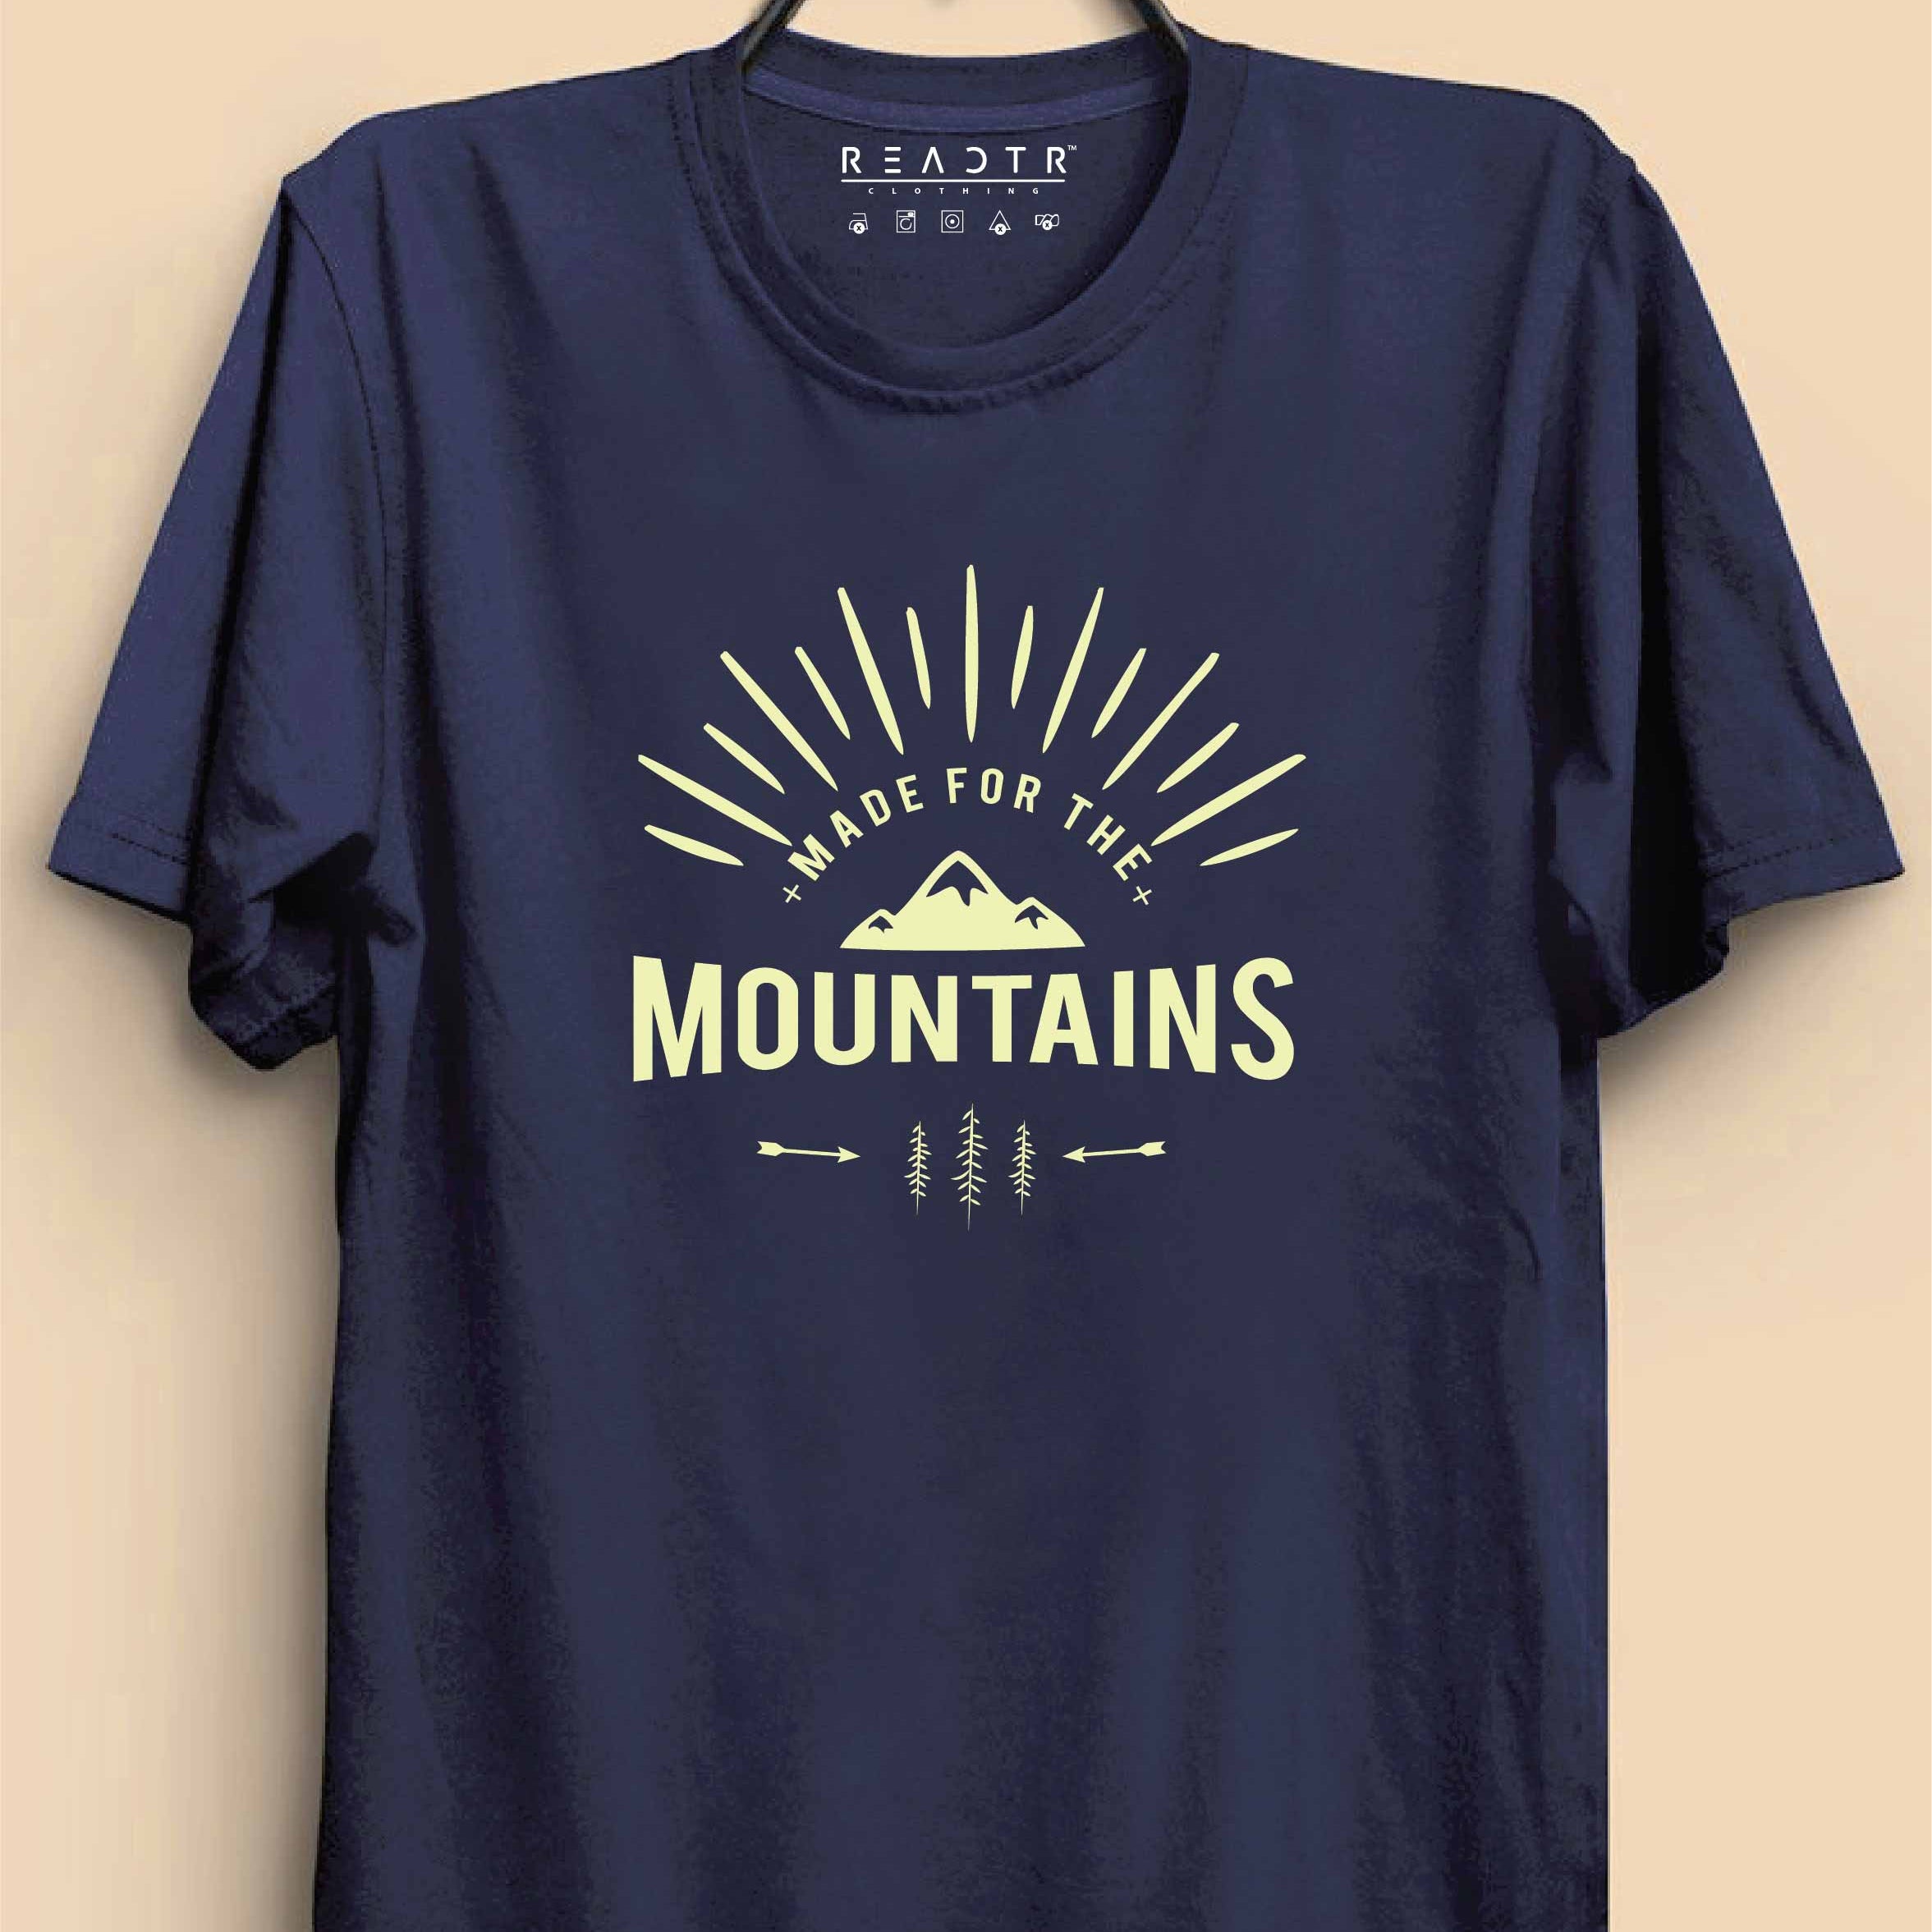 Made For The Mountains Reactr Tshirts For Men - Eyewearlabs